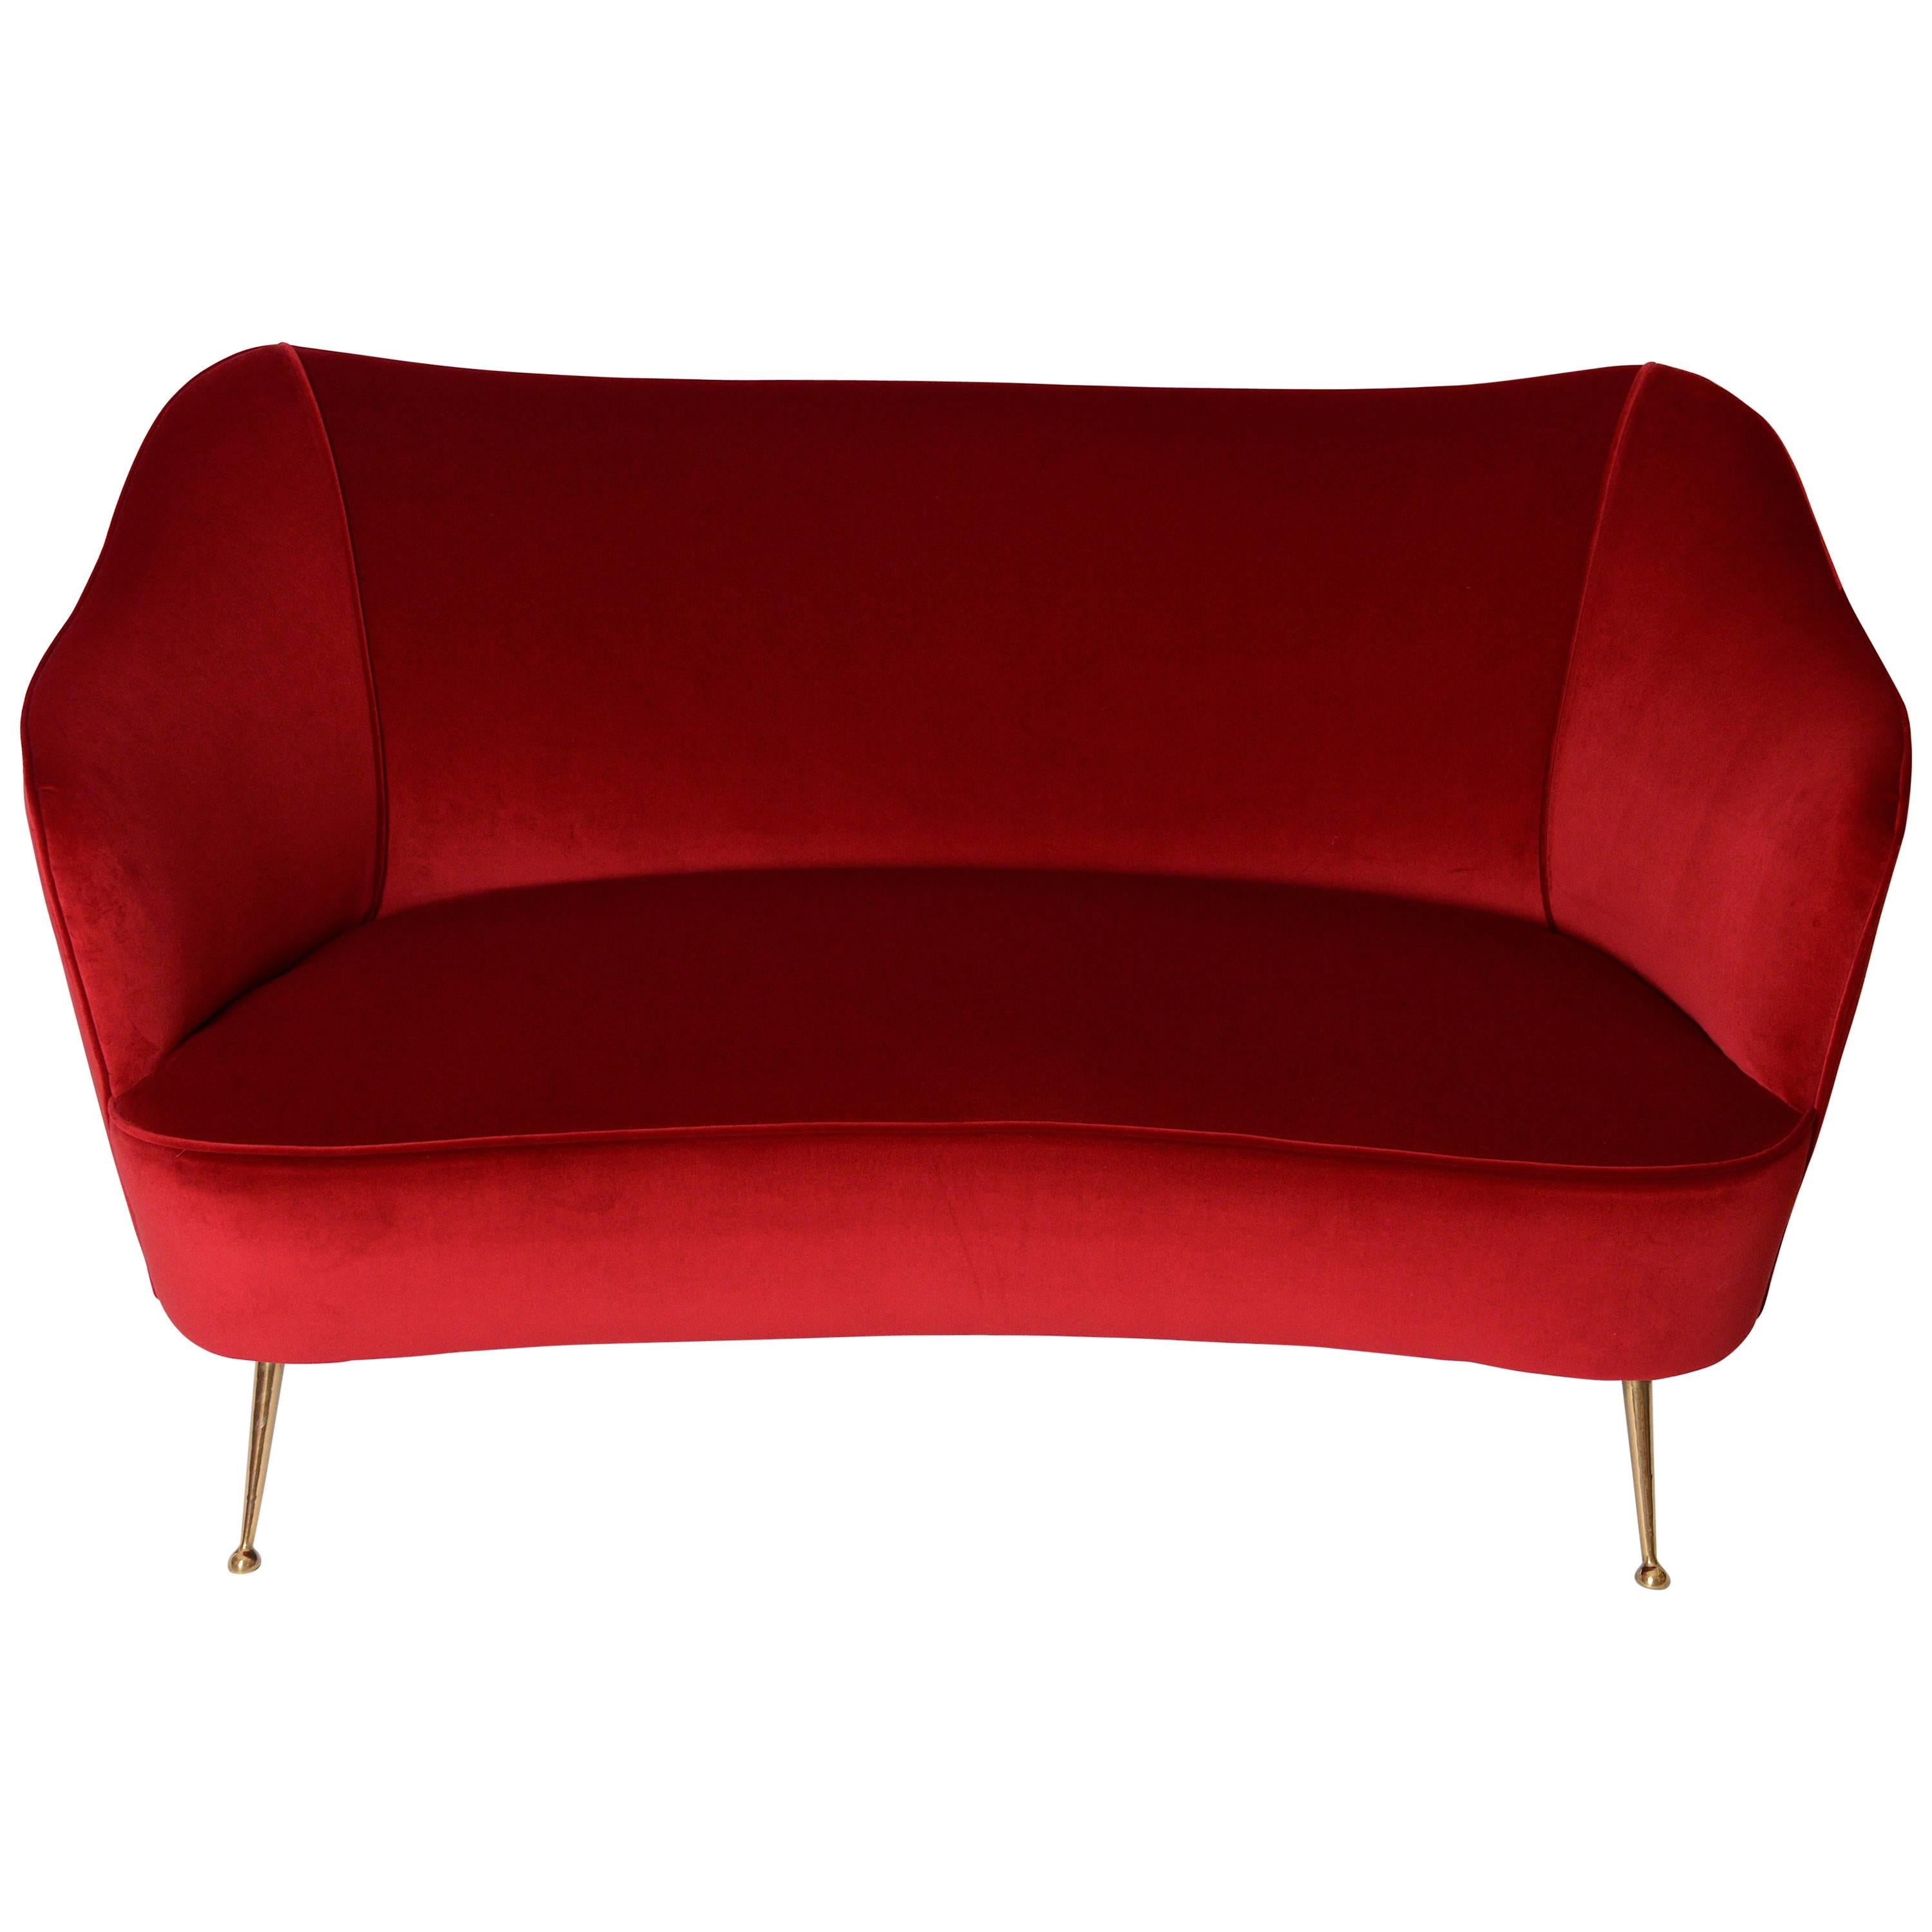 1950s Italian Red Lounge Suite